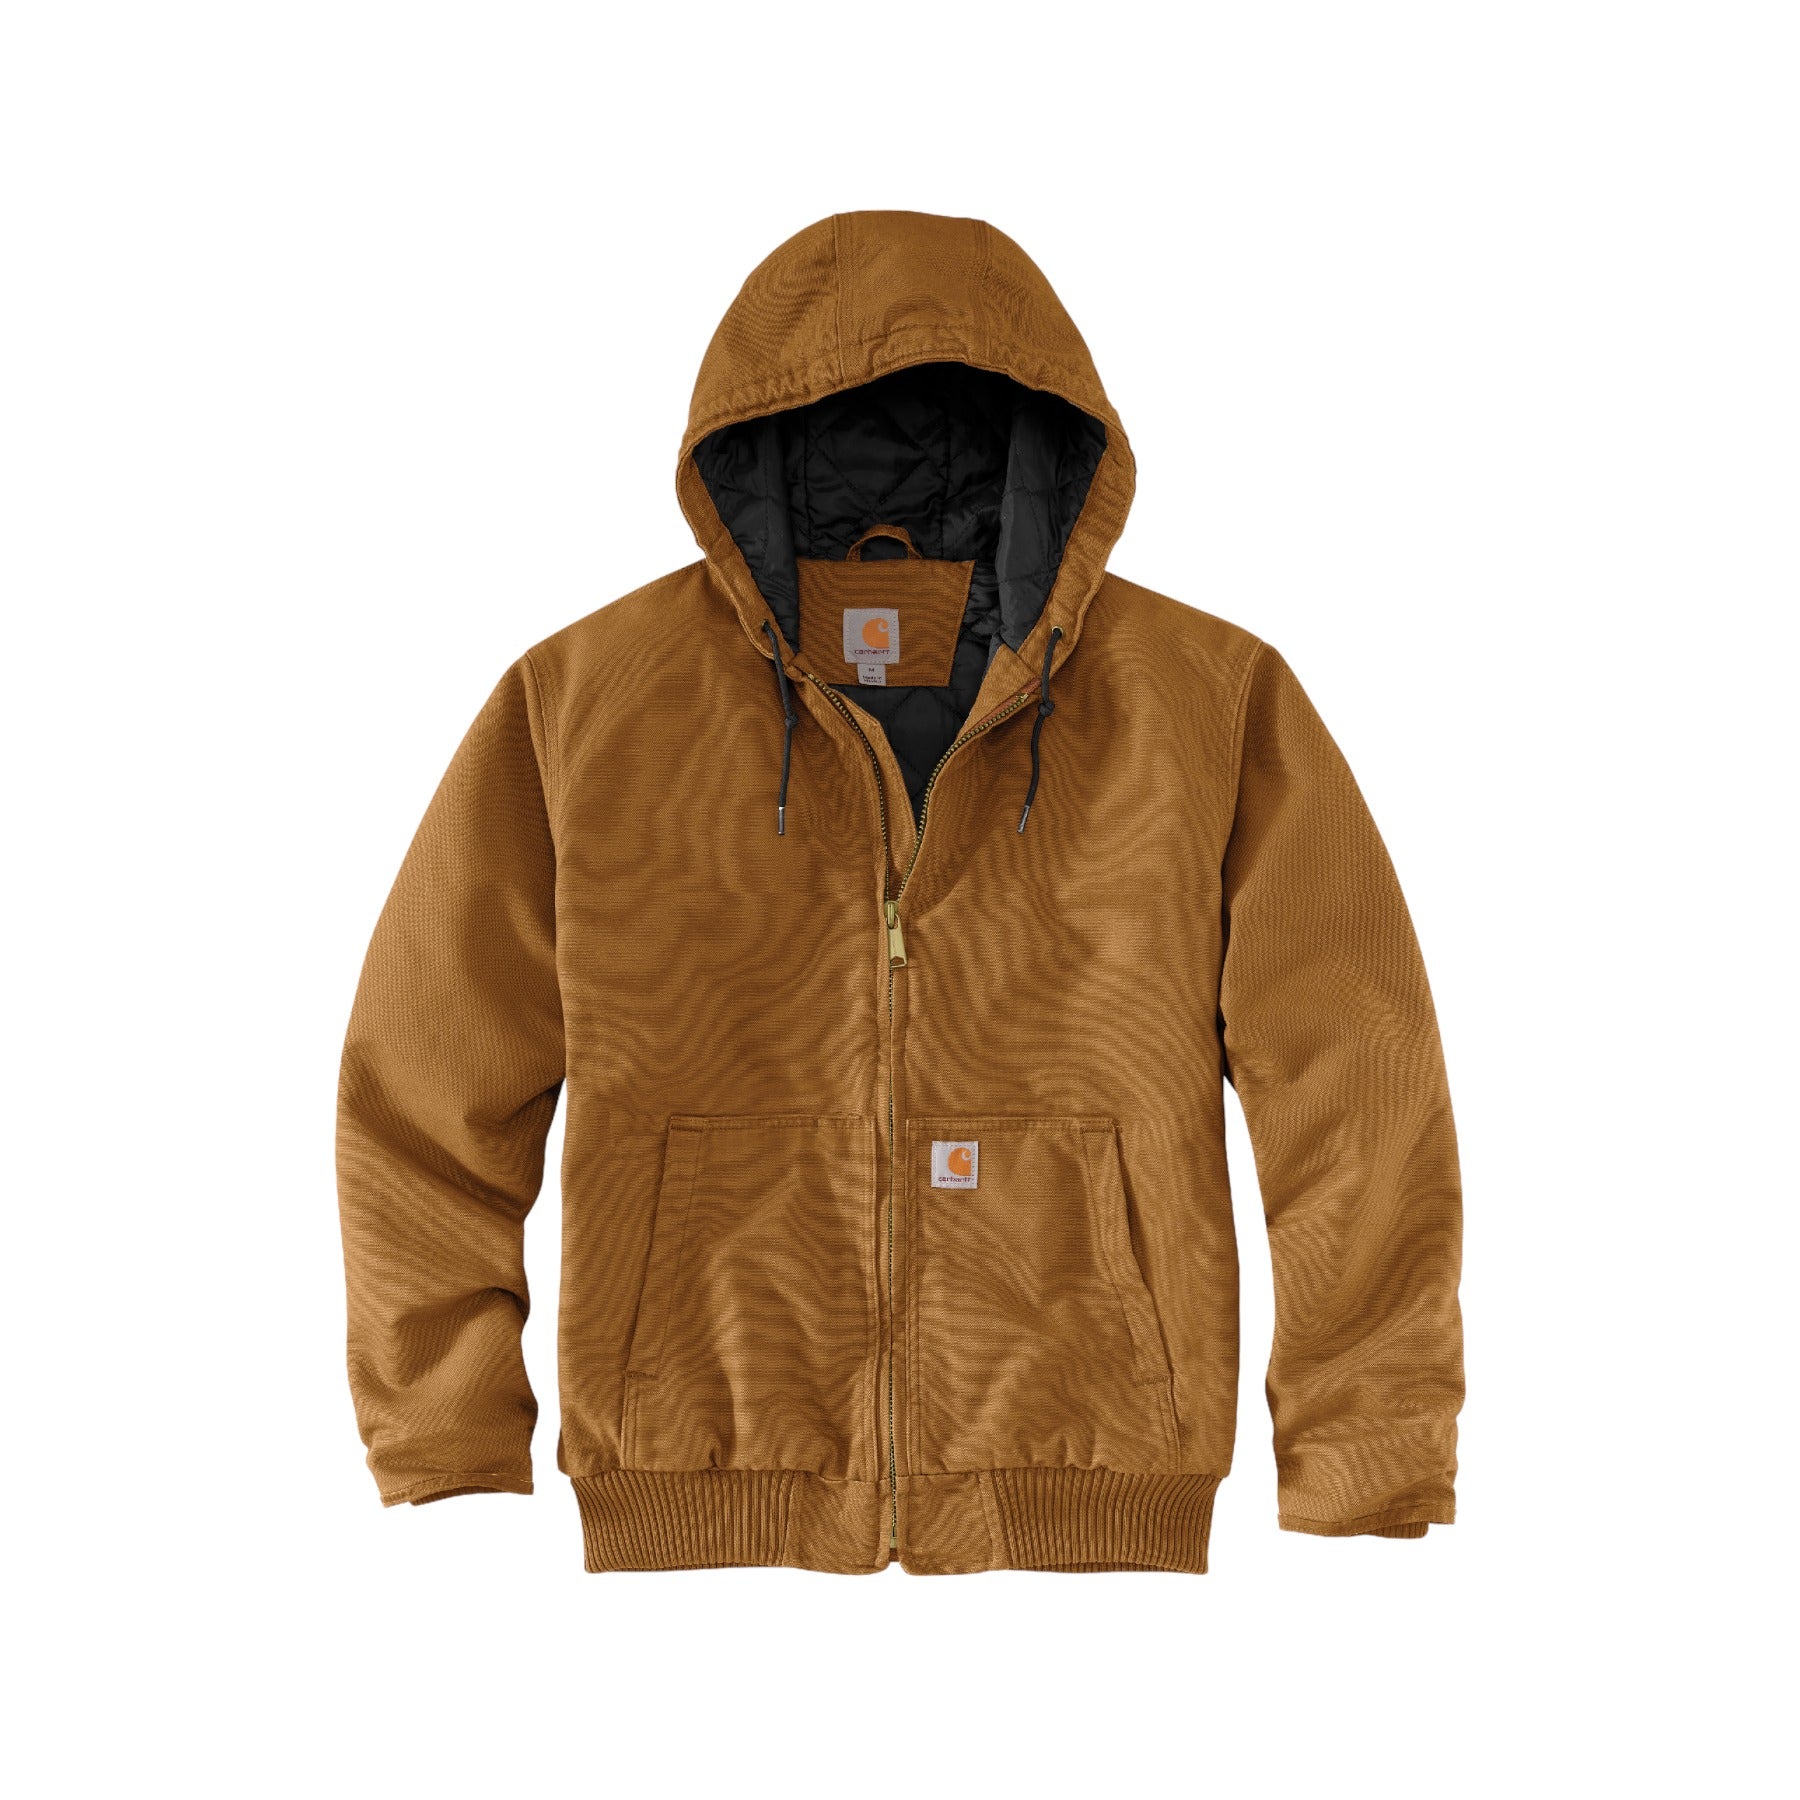 Carhartt Washed Duck Insulated Jacket - Brown